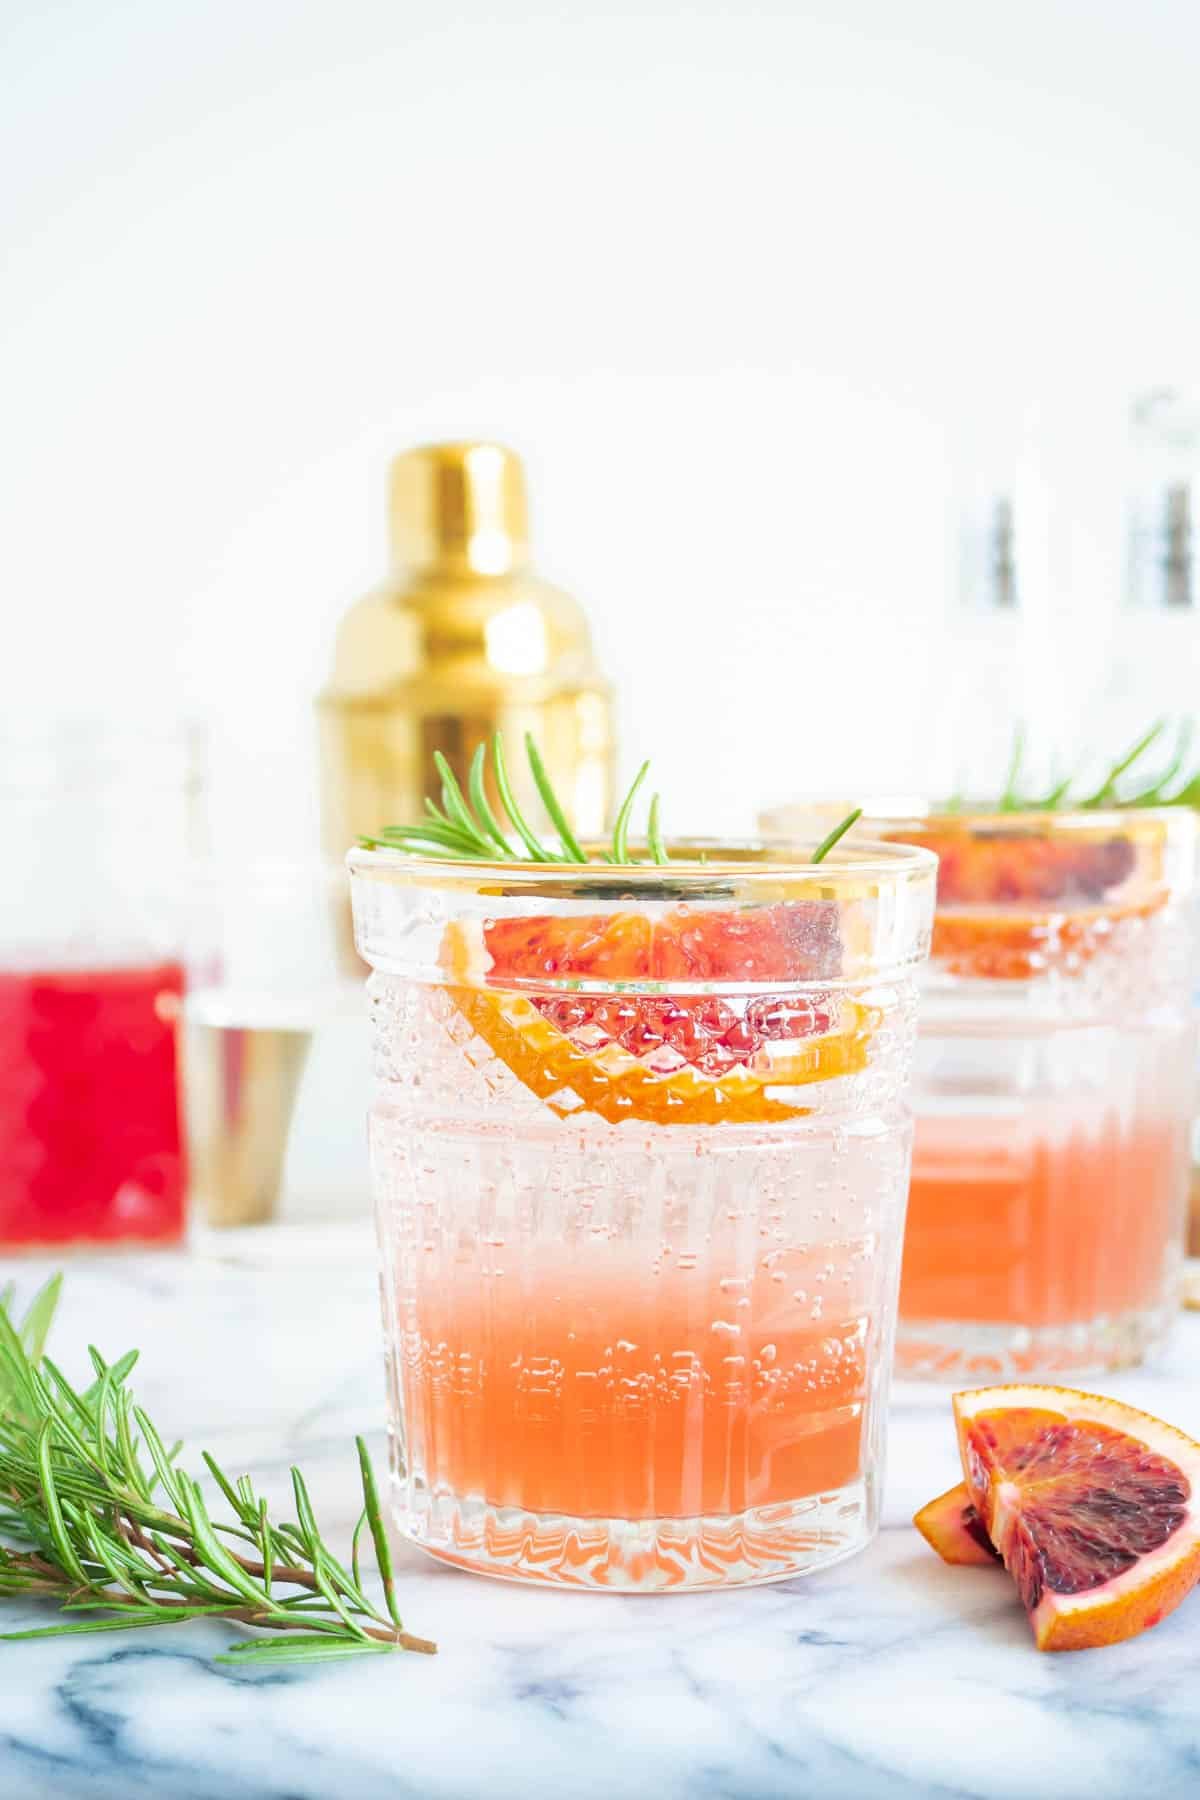 two blood orange rosemary cocktails garnished with sprigs of rosemary and wedges of blood orange next to another wedge of blood orange and a sprig of rosemary.